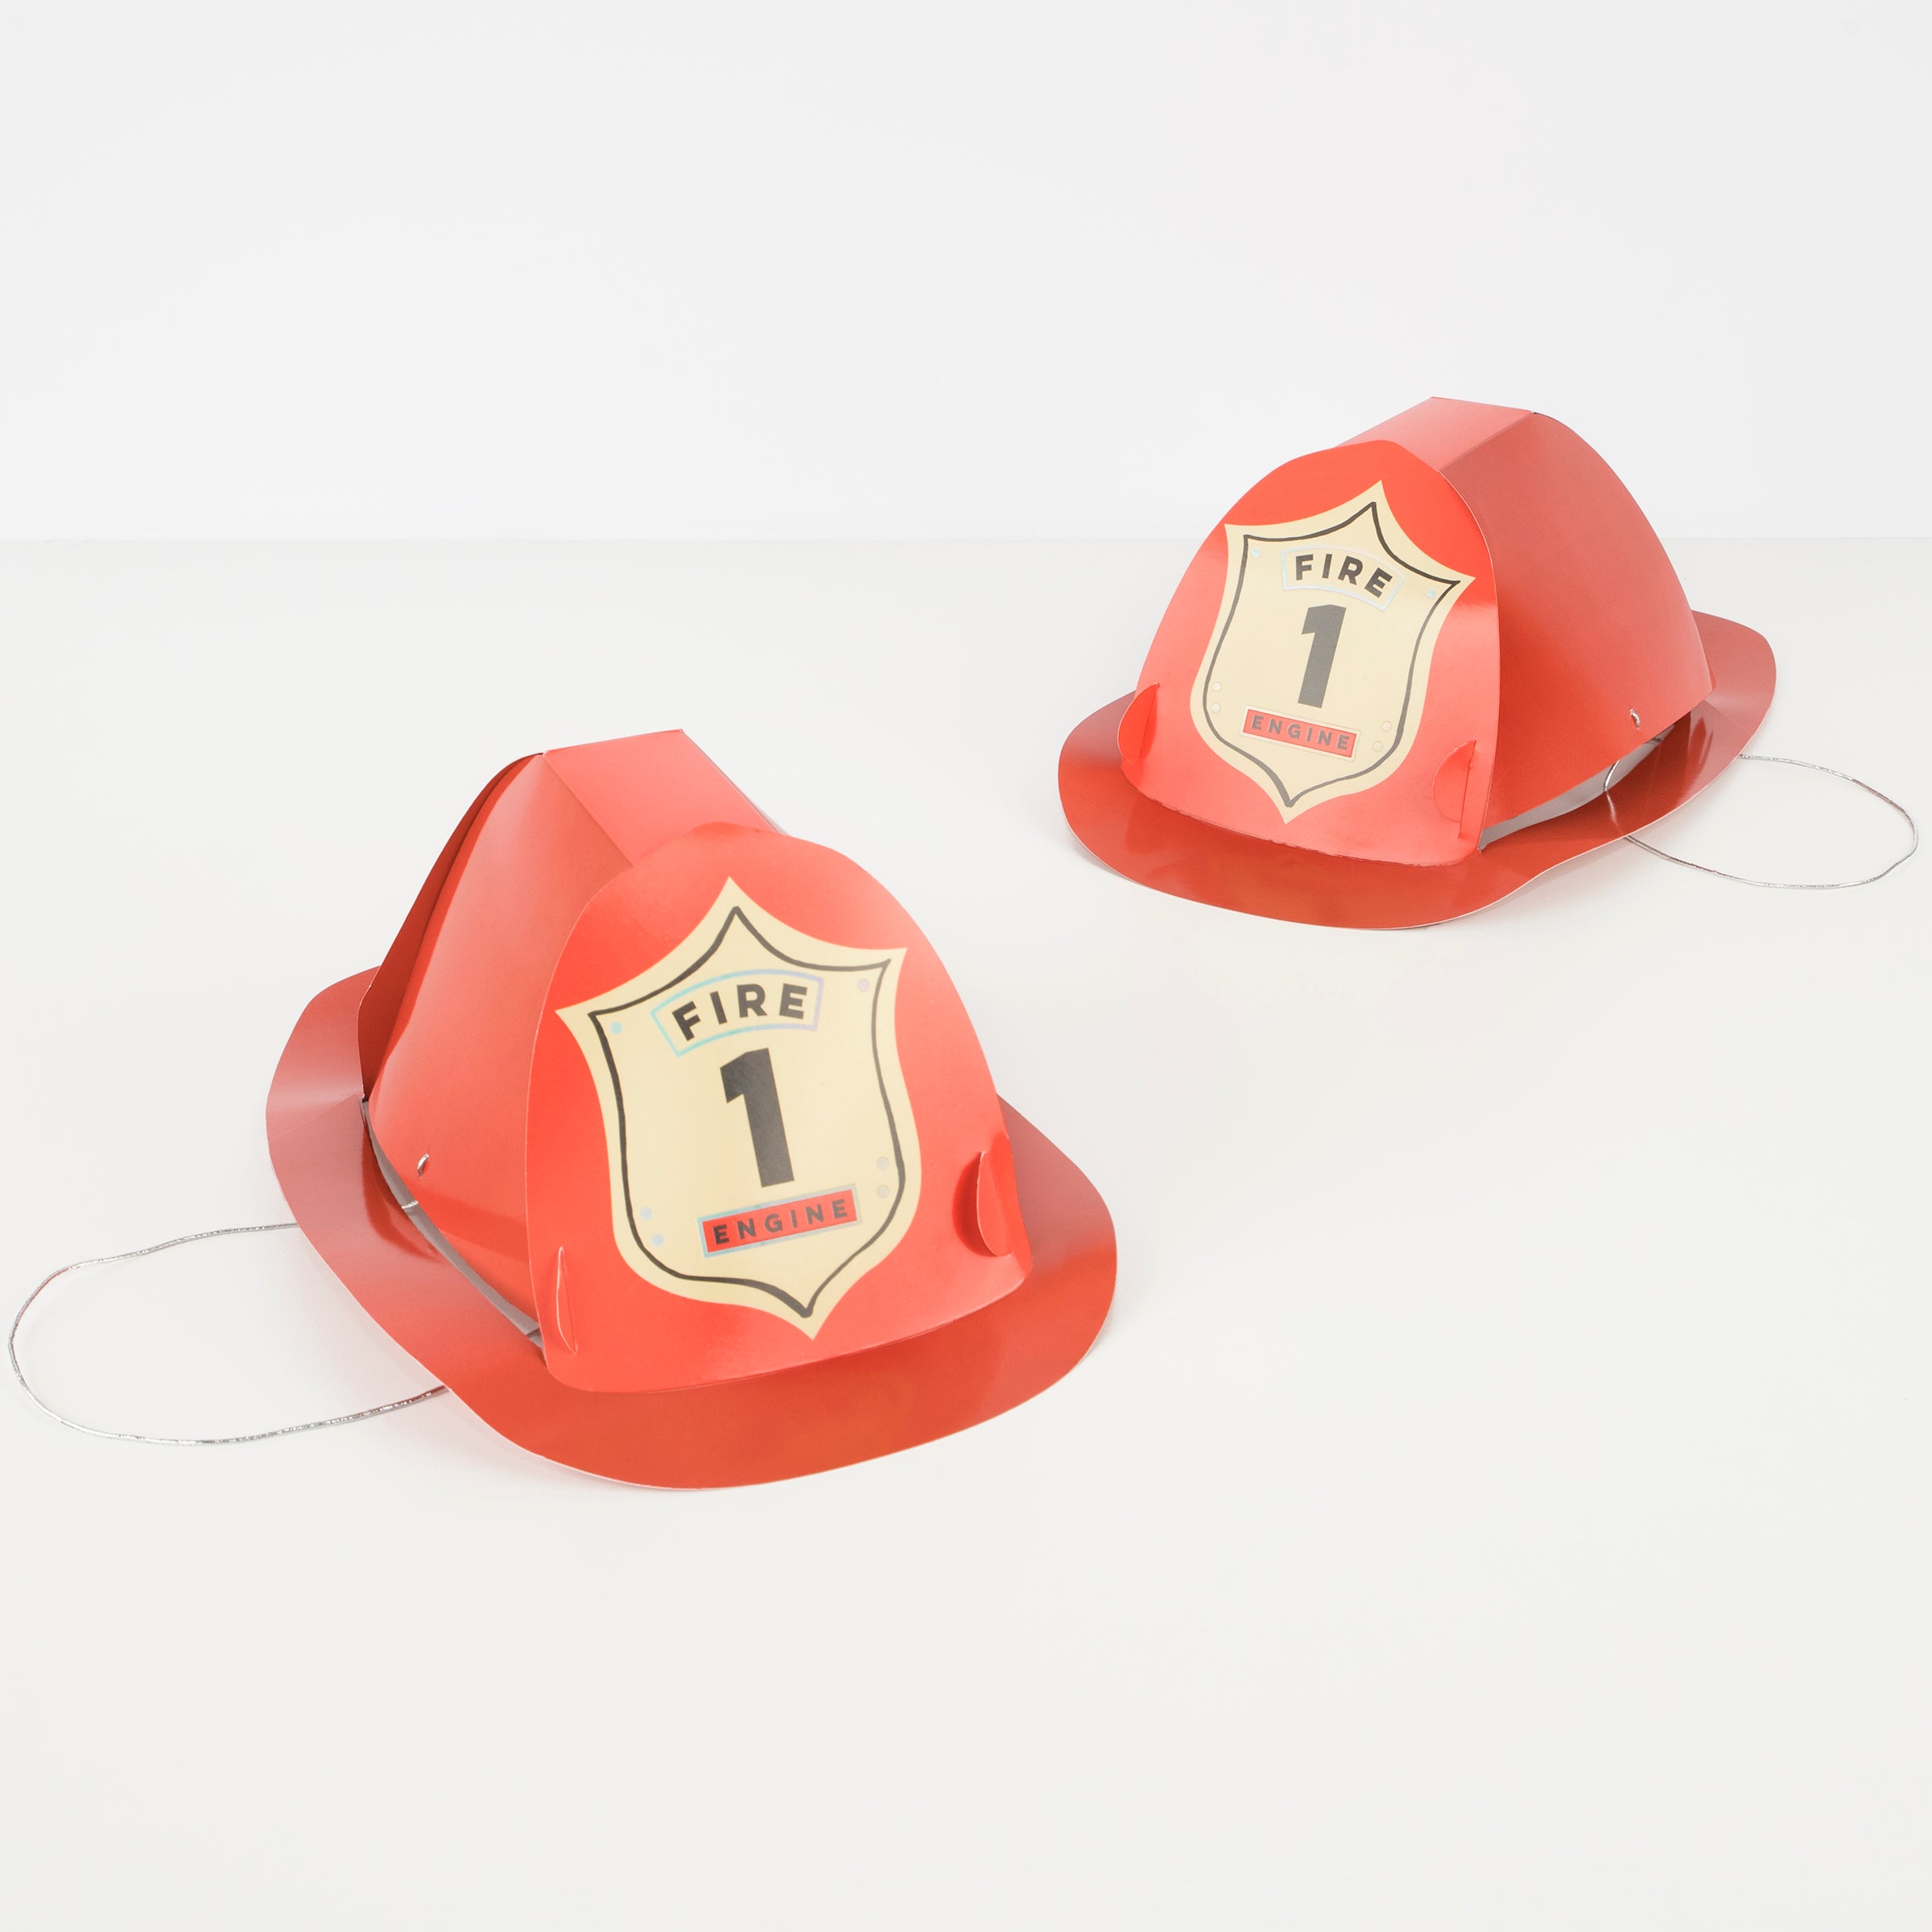 Our fabulous paper party hats are ideal for a firefighter birthday party.